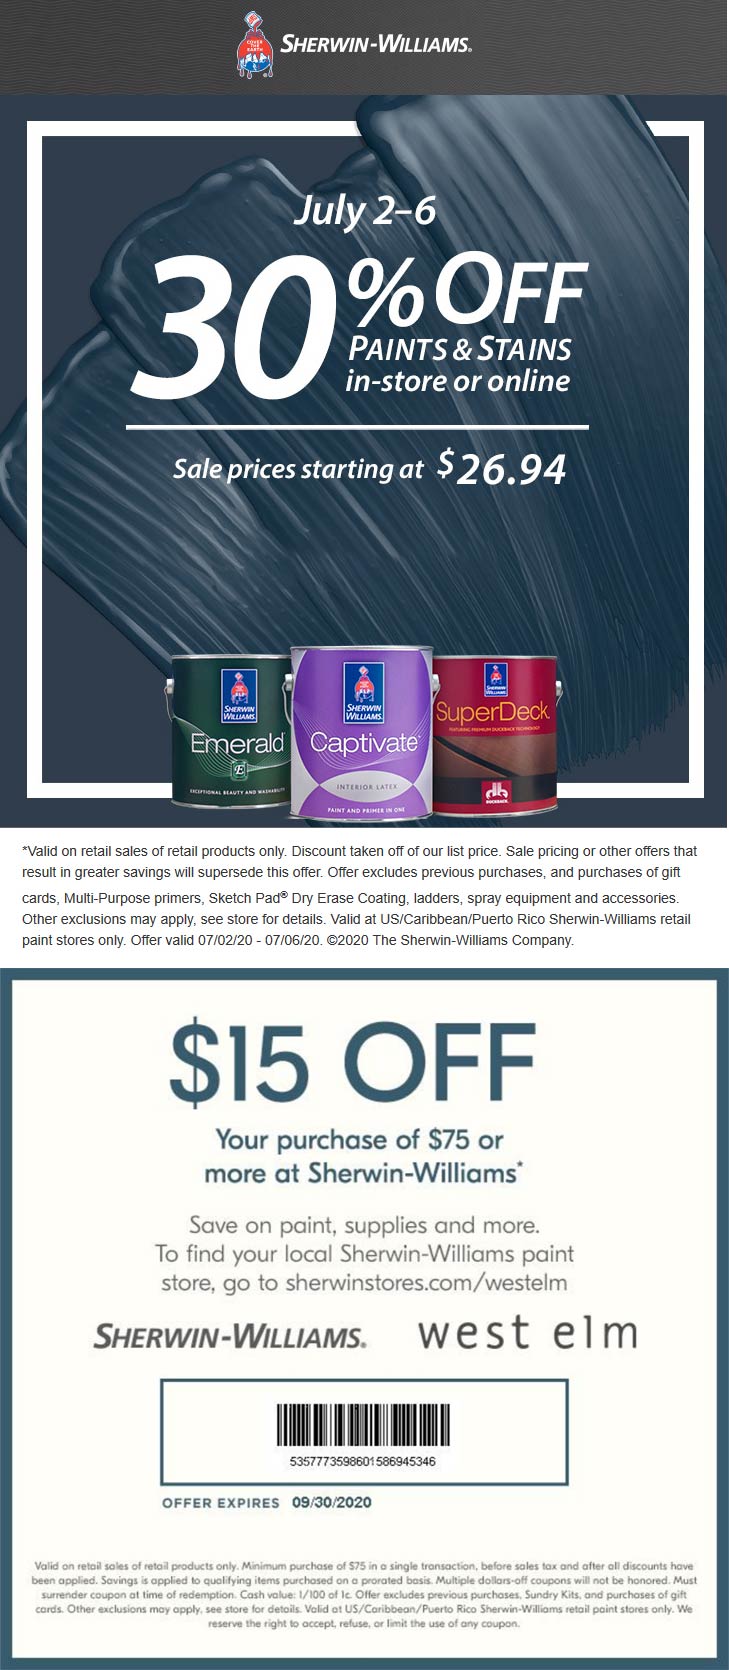 30 off paints & stains at Sherwin Williams, ditto online sherwinwilliams The Coupons App®